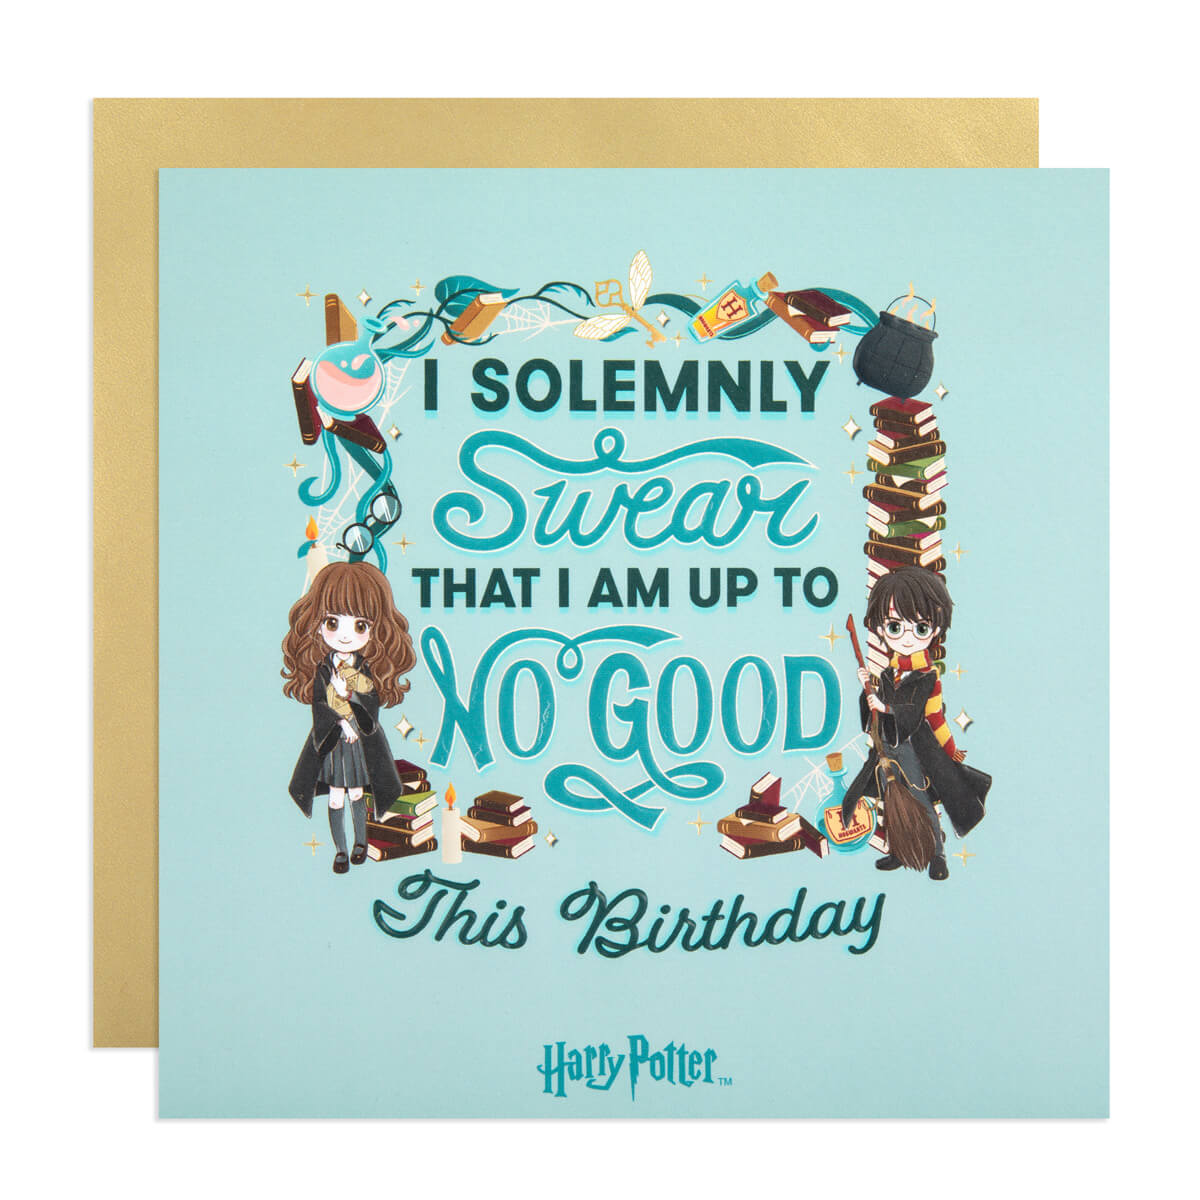 This Harry Potter Birthday Card is from the Anime Collection and features anime illustrations of Harry Potter and Hermione.  The card reads ' I Solemnly Swear That I Am Up To No Good This Birthday.'  This card is printed with a duck egg blue background colour